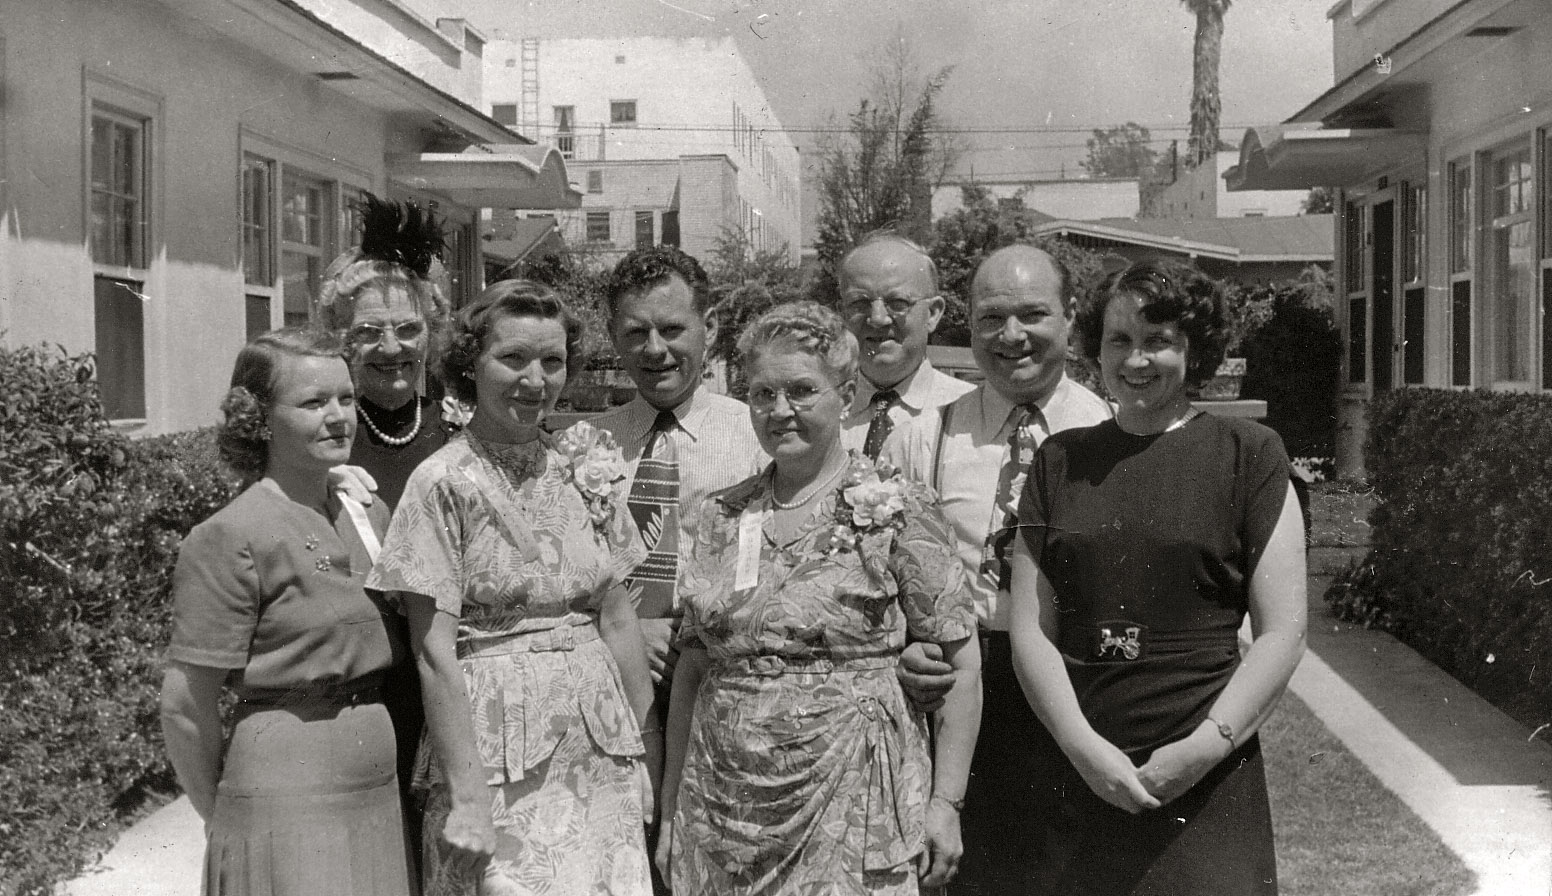 From the same spot with the group of kids, now the adults. Included in the cast are my grandparents, one of my great aunts, a great uncle, my great-grandparents, and a couple others I don't recognize. Taken around 1946. View full size.